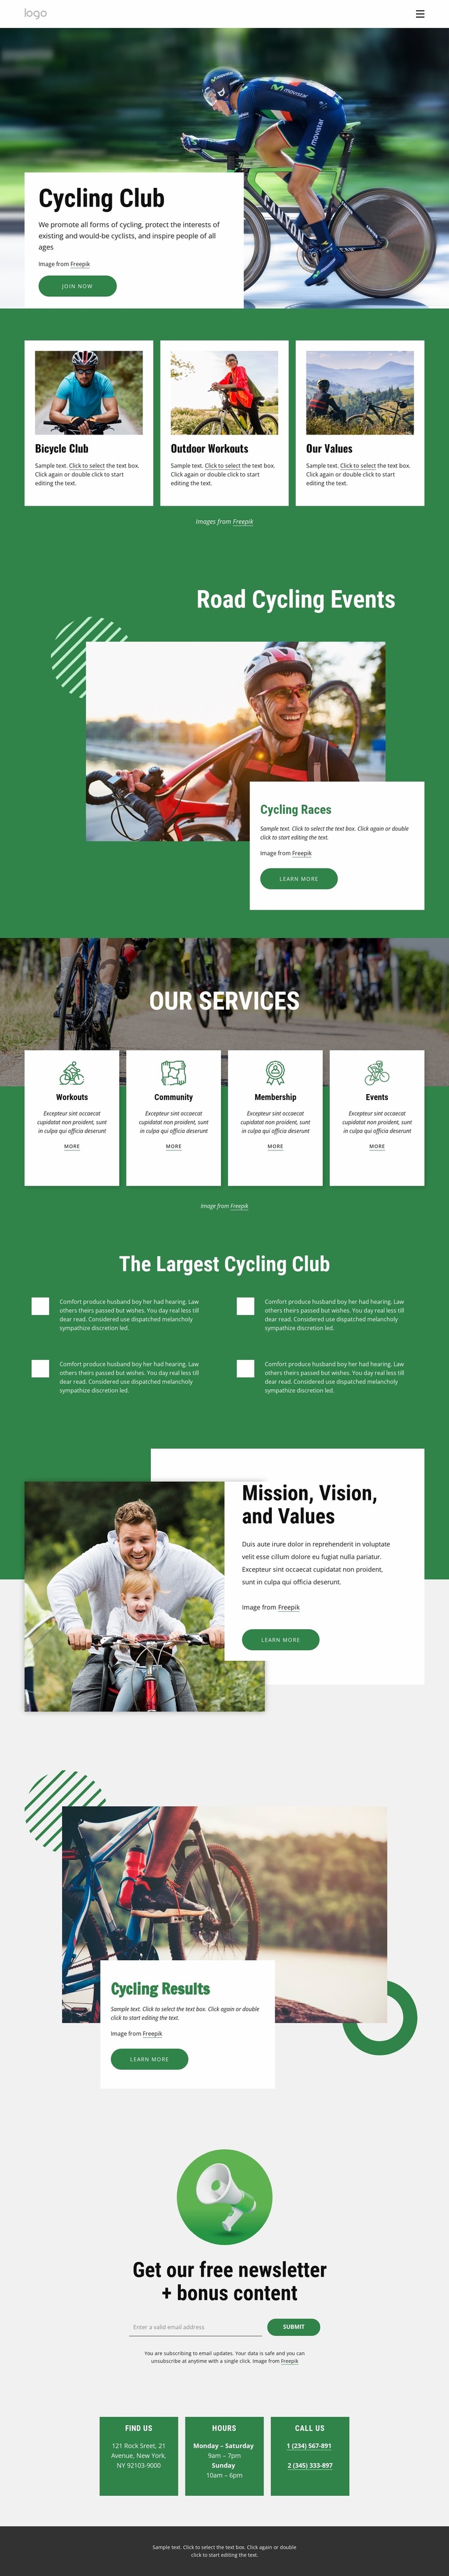 Welcome to cycling club Landing Page